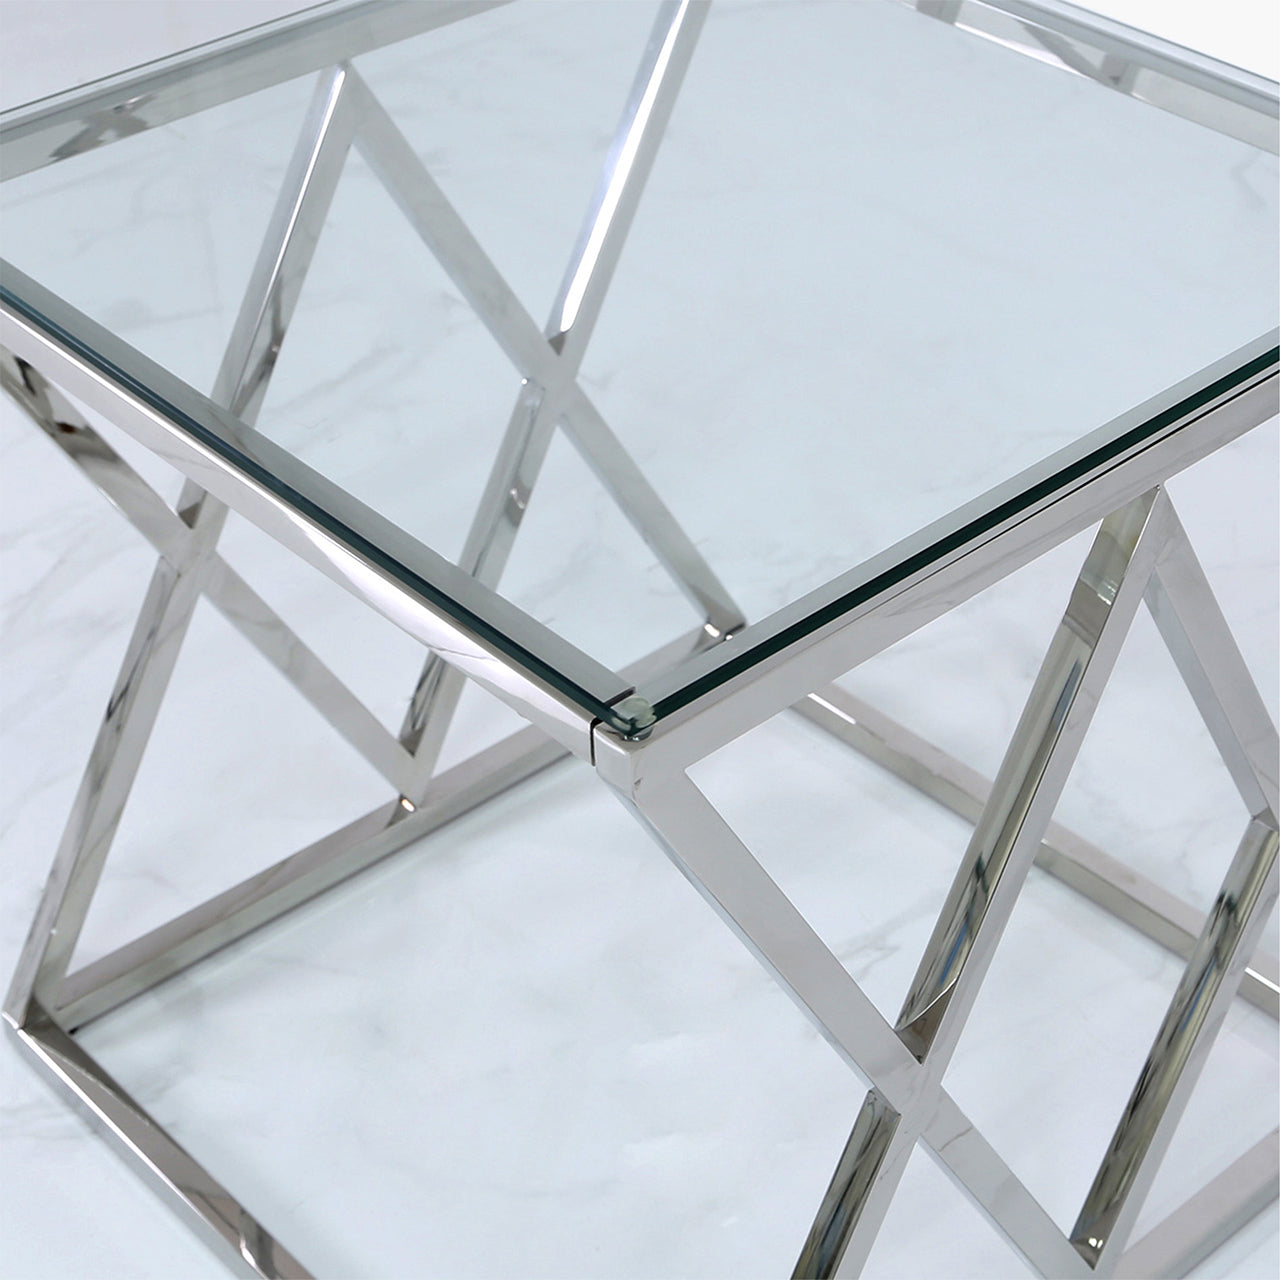 glass top side table